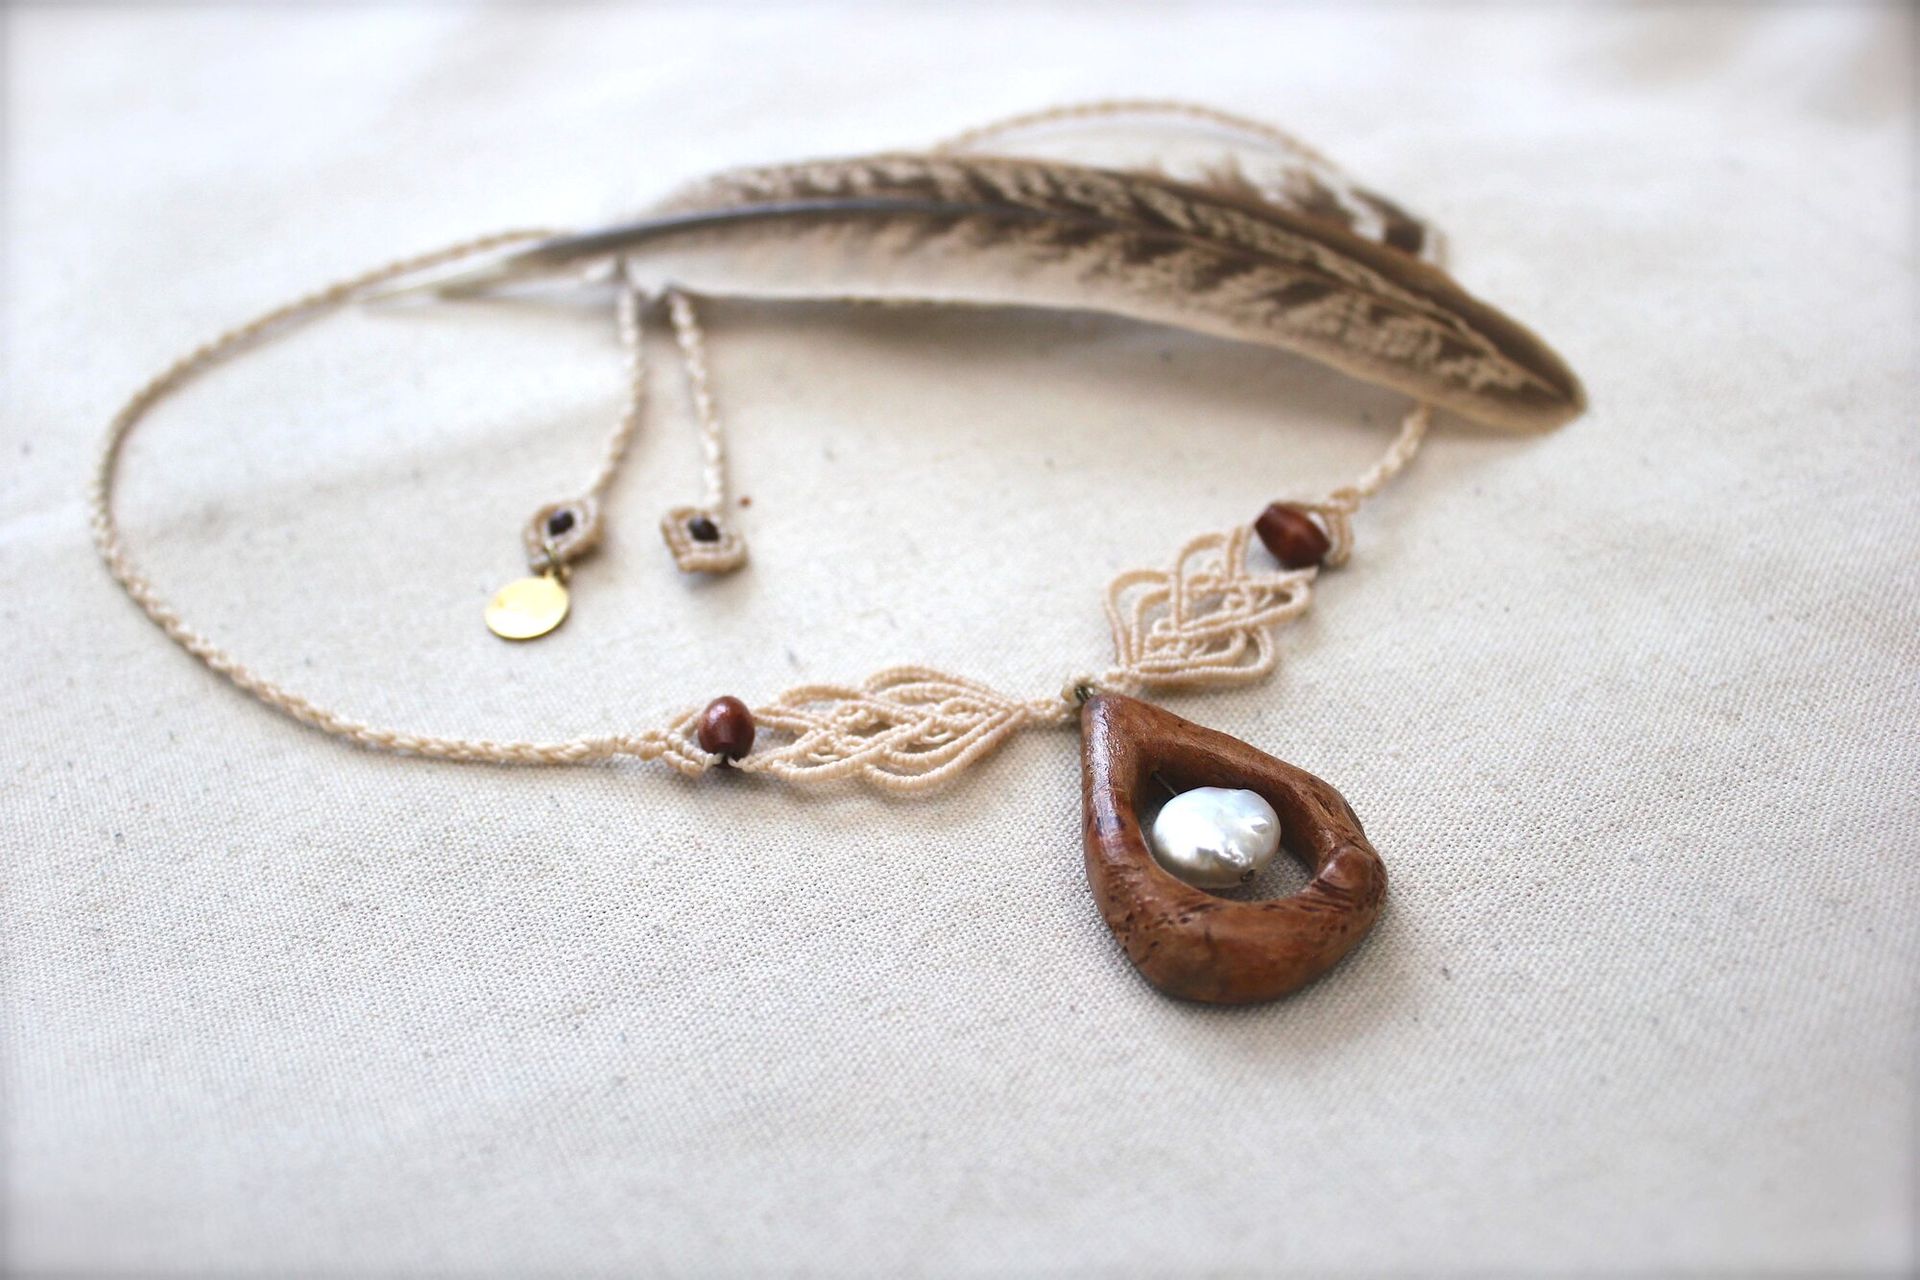 Art of Being - Healing Jewelry - Micro macrame - crystals - wood - pearl - nature